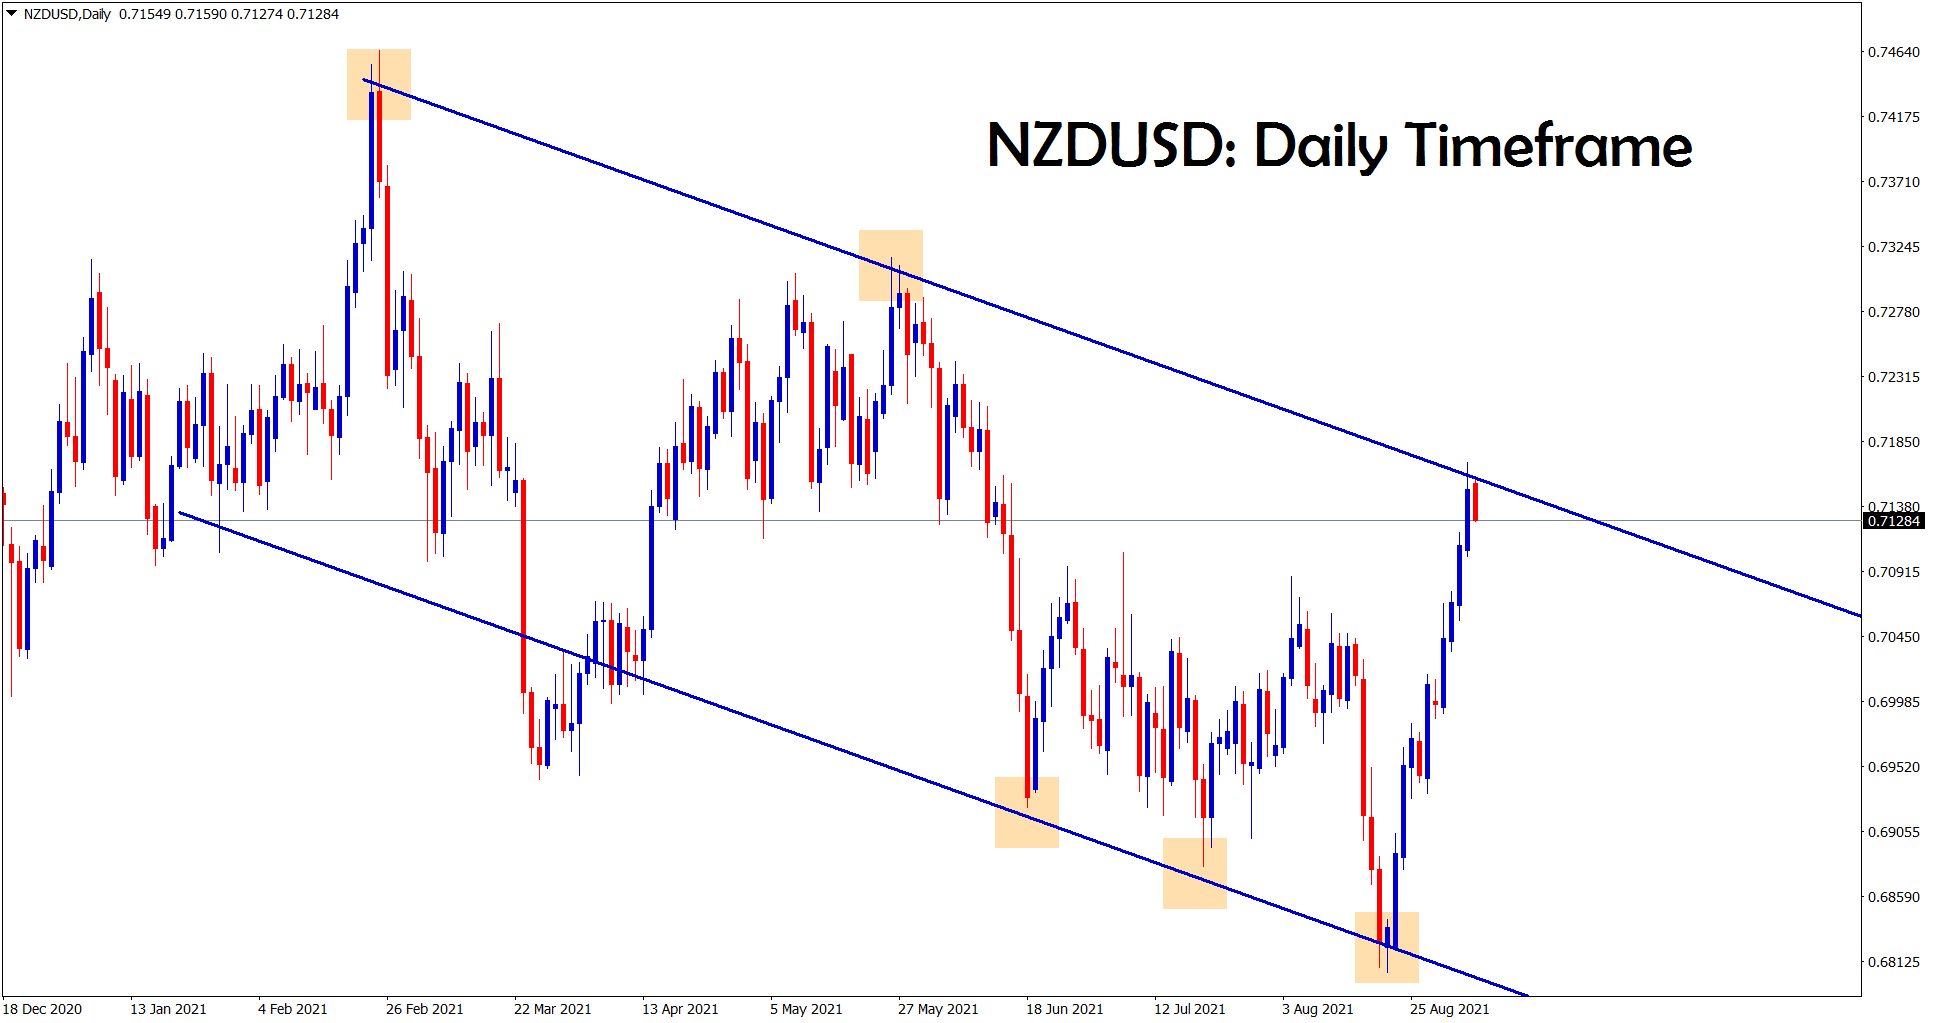 NZDUSD is making a correction from the lower high of the descending channel